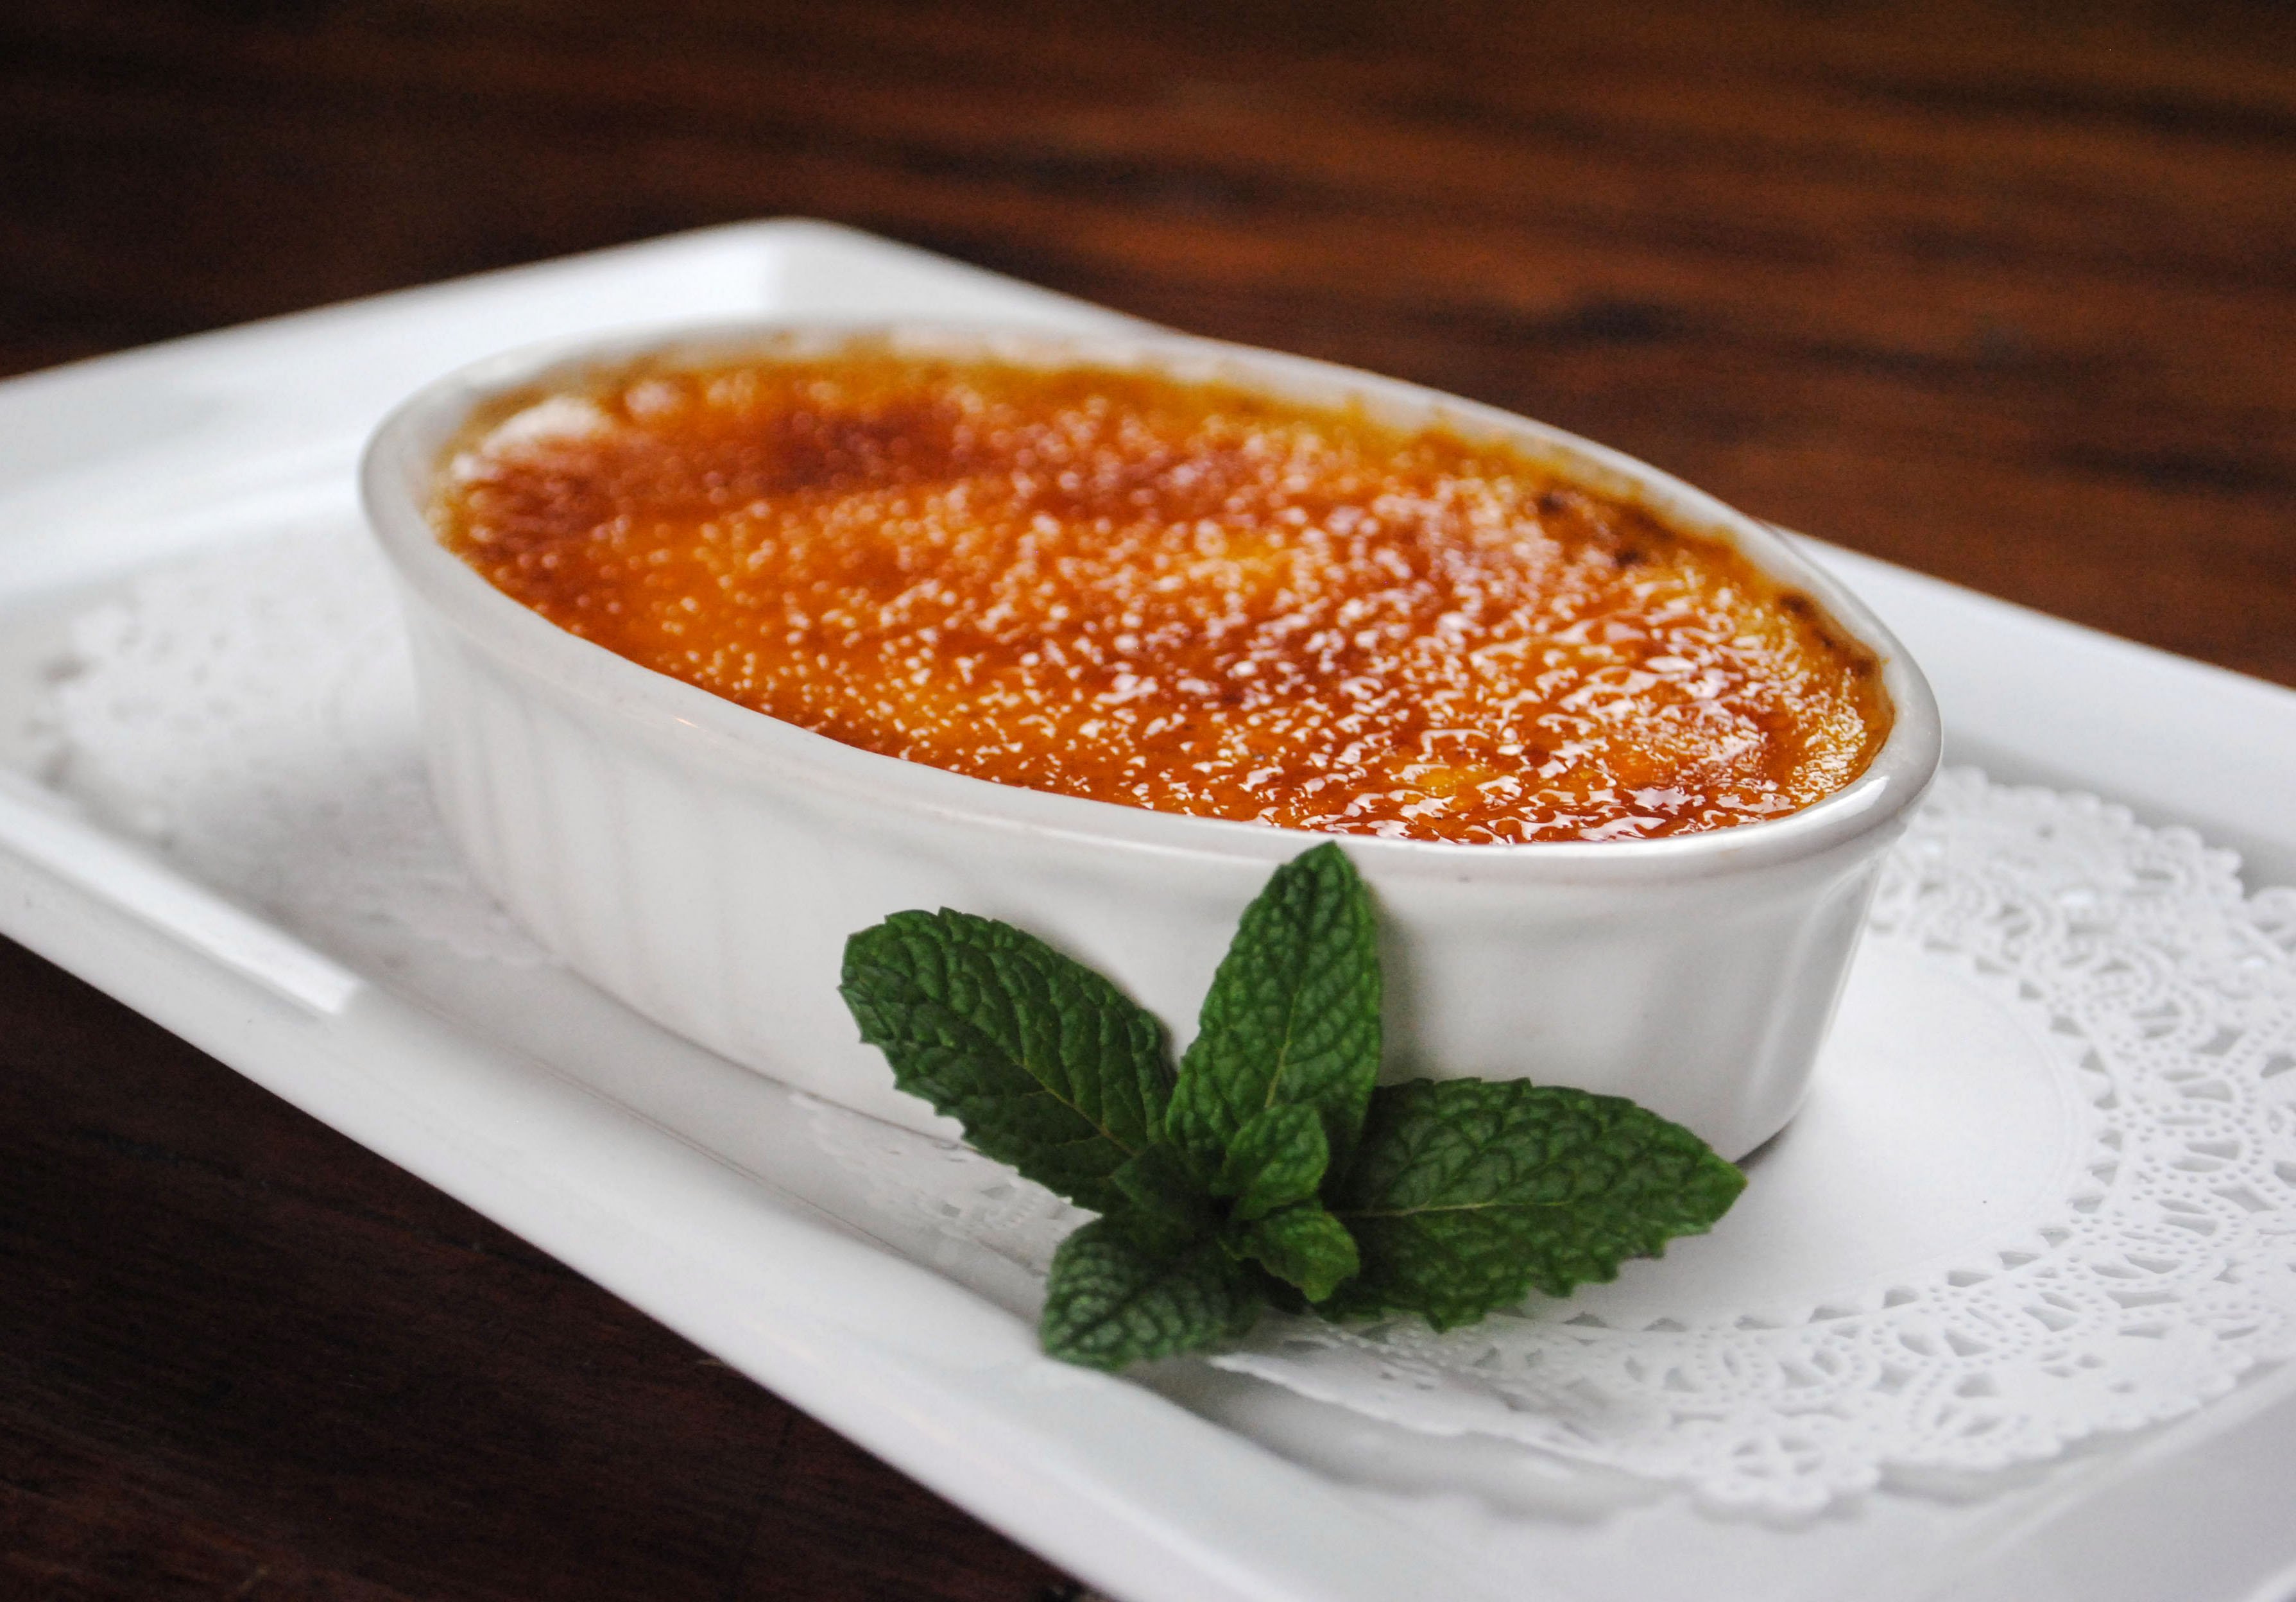 Creme Brulee is a stable on our dining pavilion menu